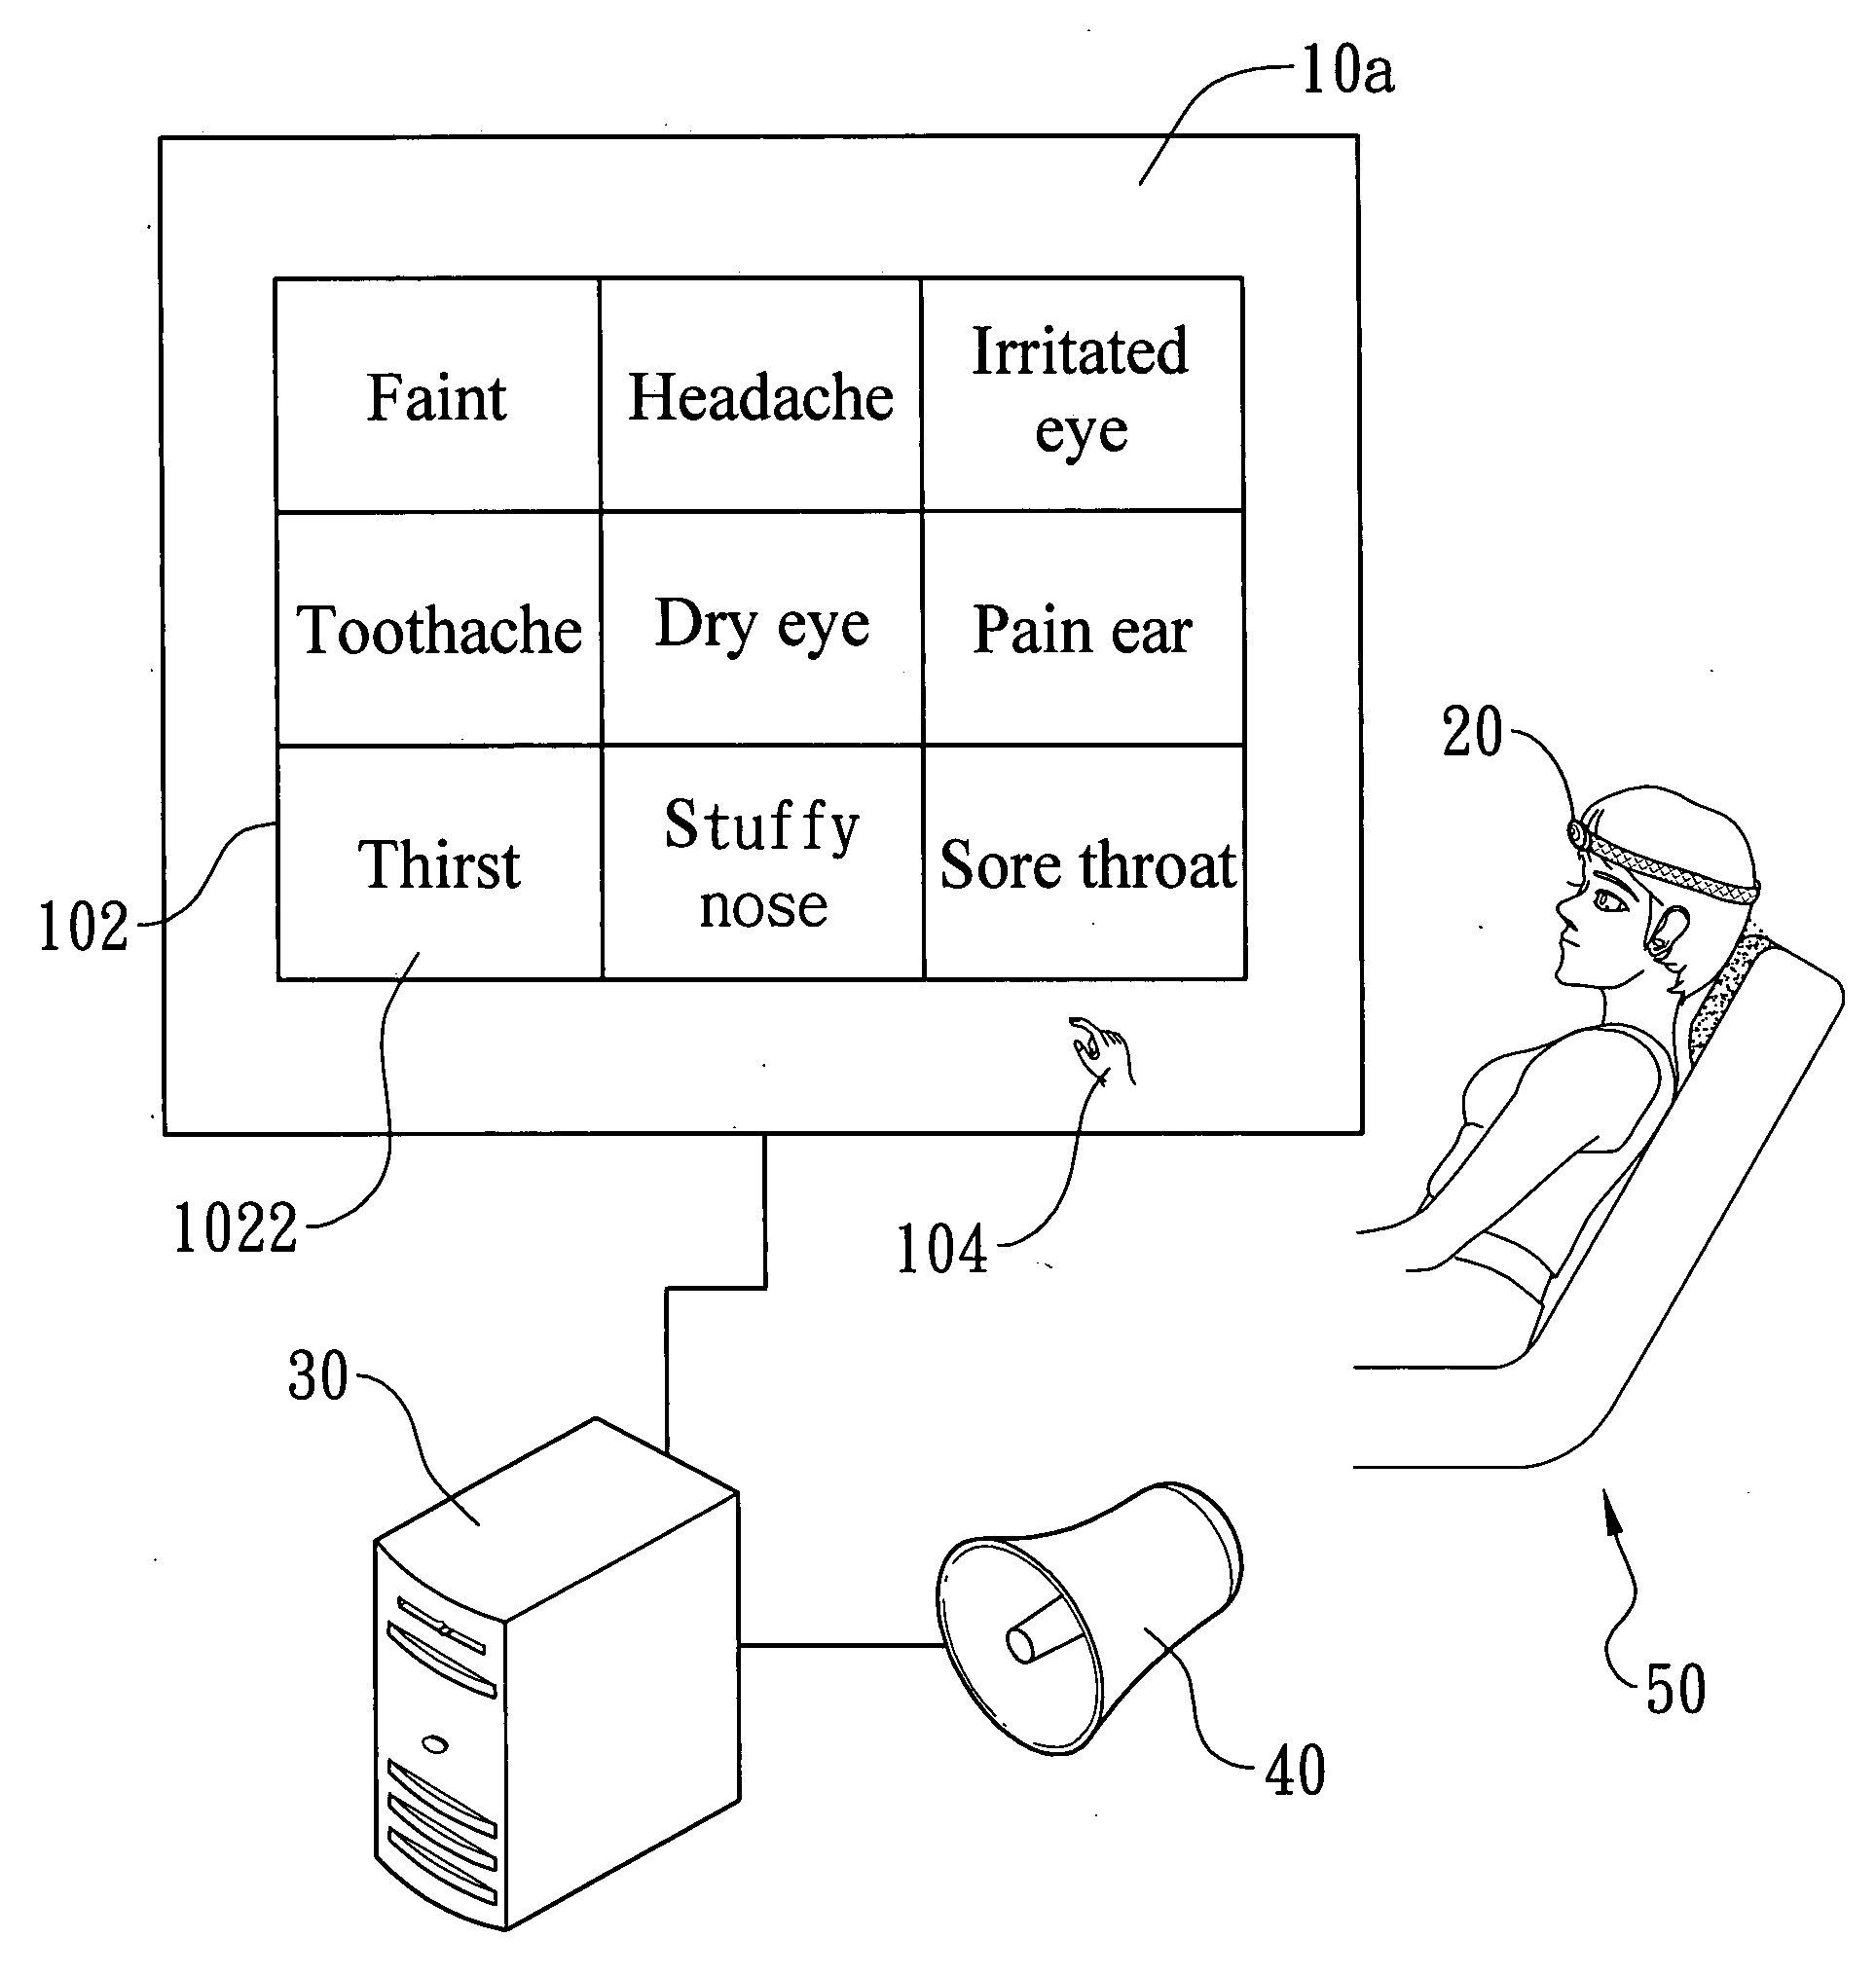 Speech communication system for patients having difficulty in speaking or writing